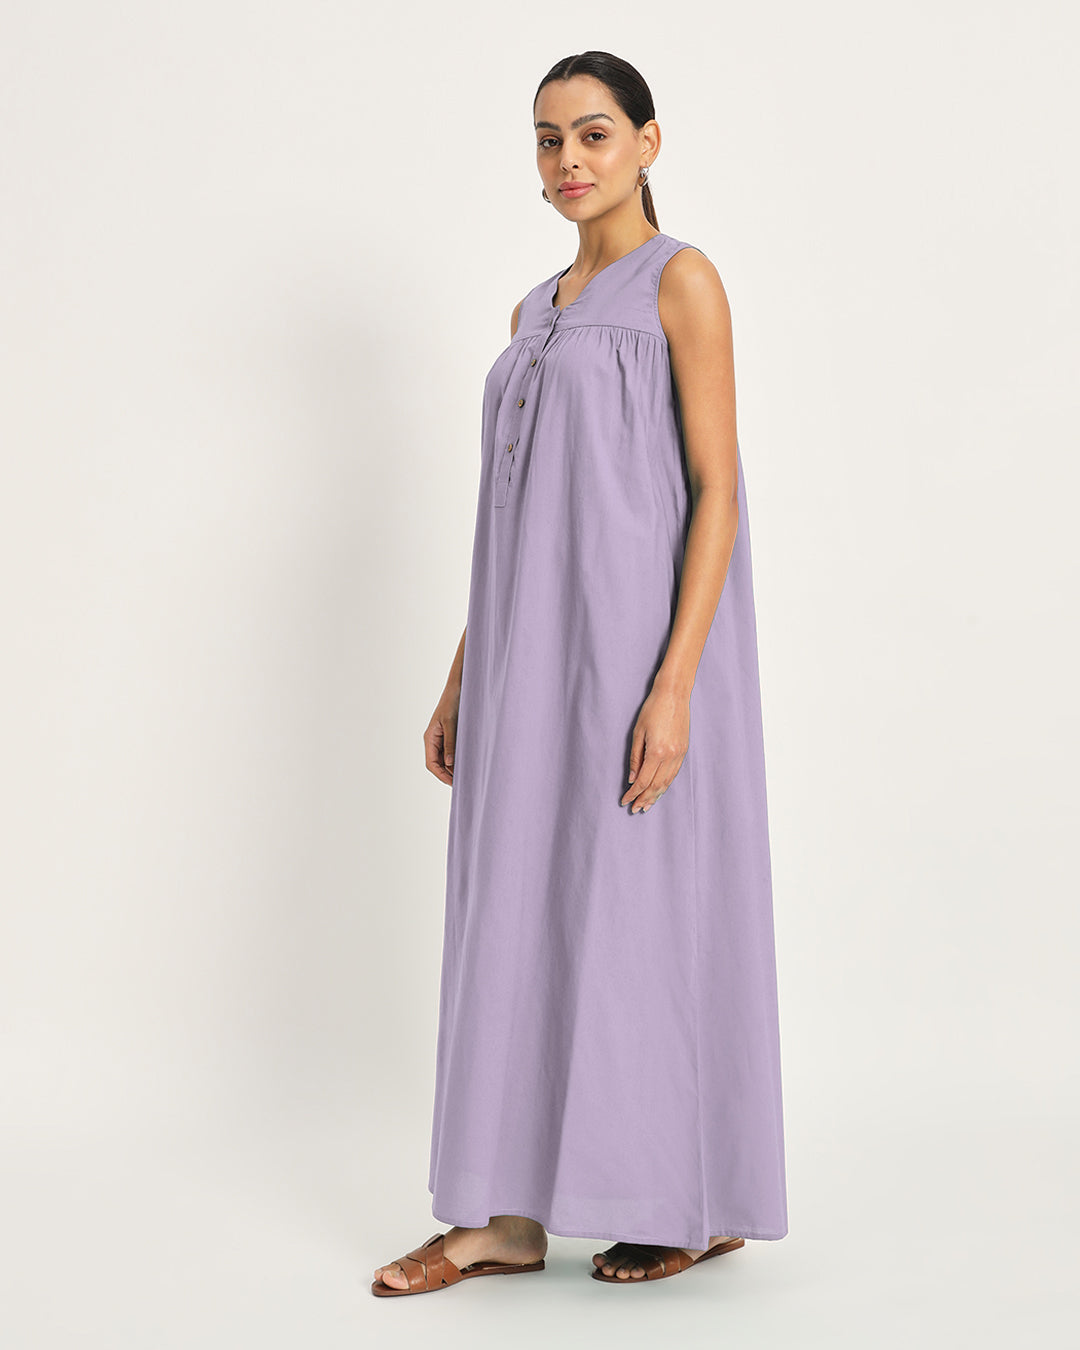 Combo: Lilac & Russet Red Restful Retreat Nightdress